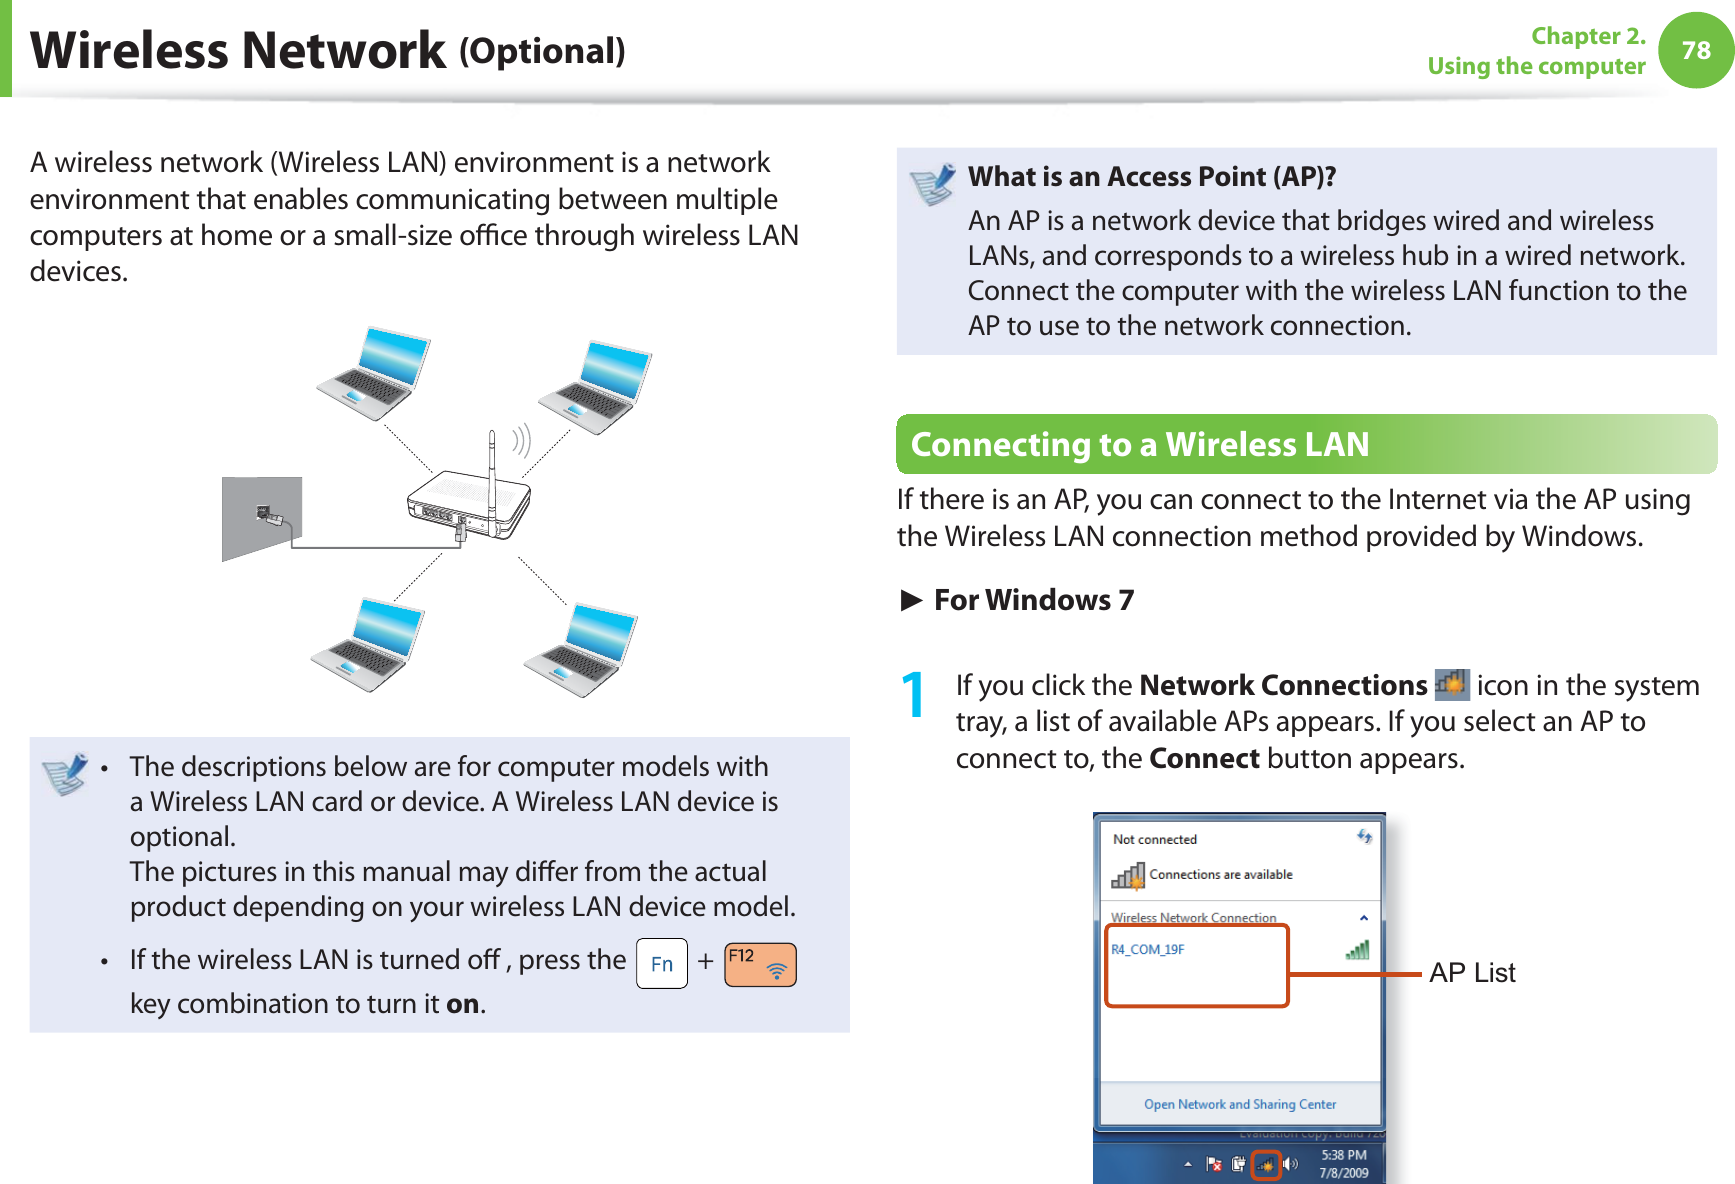 78Chapter 2. Using the computerA wireless network (Wireless LAN) environment is a network environment that enables communicating between multiple computers at home or a small-size oﬃ  ce through wireless LAN devices.The descriptions below are for computer models with t a Wireless LAN card or device. A Wireless LAN device is optional.The pictures in this manual may diﬀ er from the actual product depending on your wireless LAN device model.If the wireless LAN is turned oﬀ  , press the t  +   key combination to turn it on.What is an Access Point ( AP)?An AP is a network device that bridges wired and wireless LANs, and corresponds to a wireless hub in a wired network. Connect the computer with the wireless LAN function to the AP to use to the network connection.Connecting to a Wireless LANIf there is an AP, you can connect to the Internet via the AP using the Wireless LAN connection method provided by Windows.► For Windows 71  If you click the Network Connections  icon in the system tray, a list of available APs appears. If you select an AP to connect to, the Connect button appears.AP List Wireless  Network  (Optional)